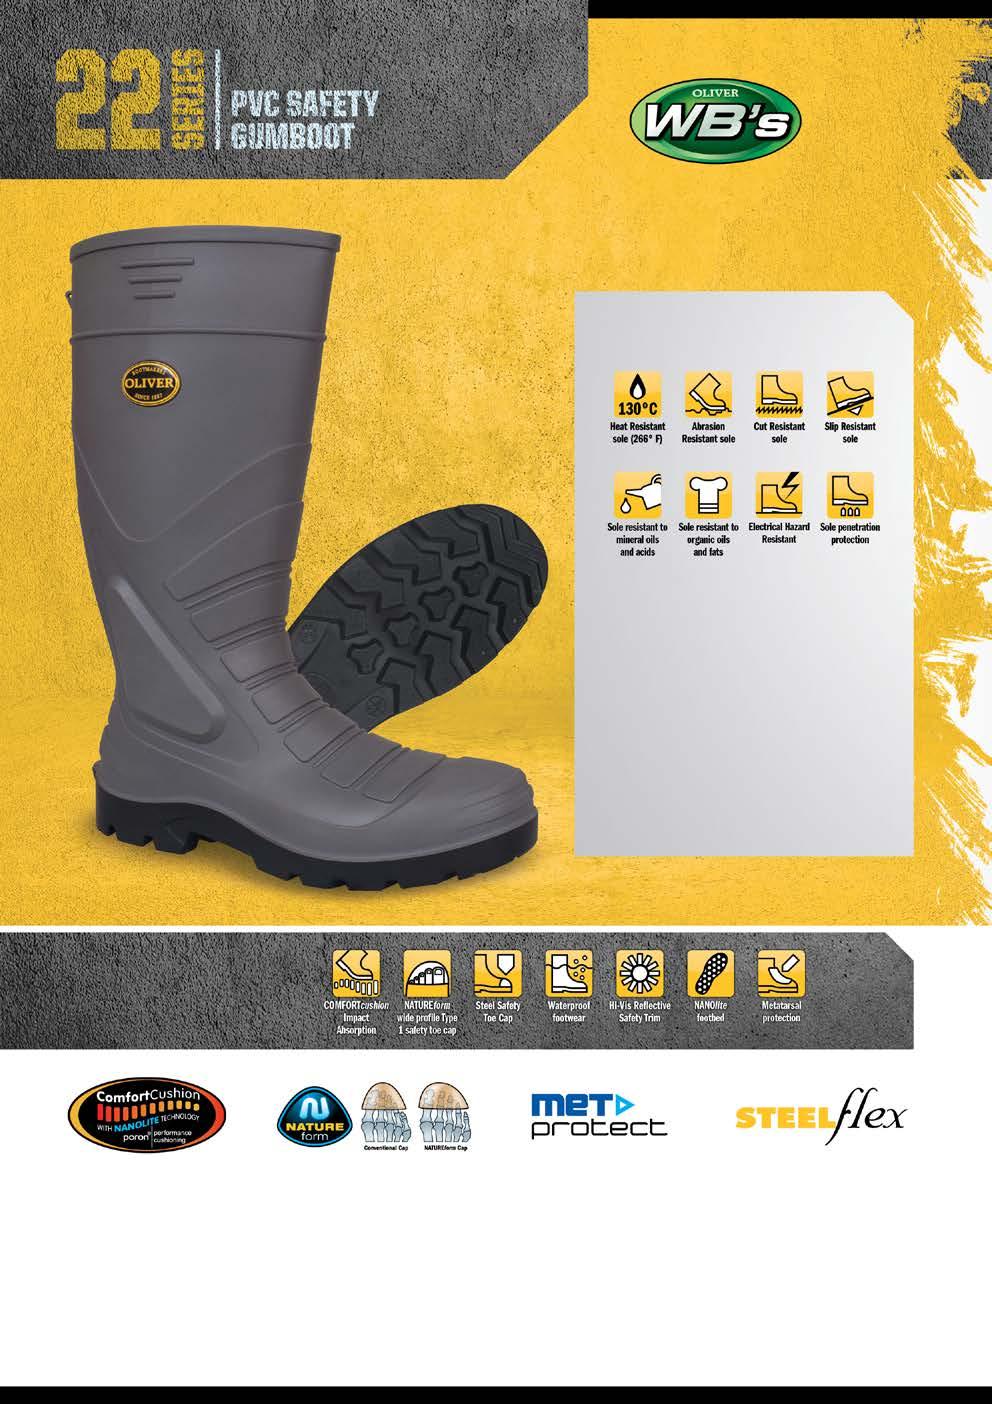 22-205 GREY SAFETY GUMBOOT Waterproof PVC gumboot STEELflex steel midsole penetration protection METprotect Metatarsal protection Kick off spur Two trim heights Sizes: 5-13 COMPLIES AS/NZS 2210.